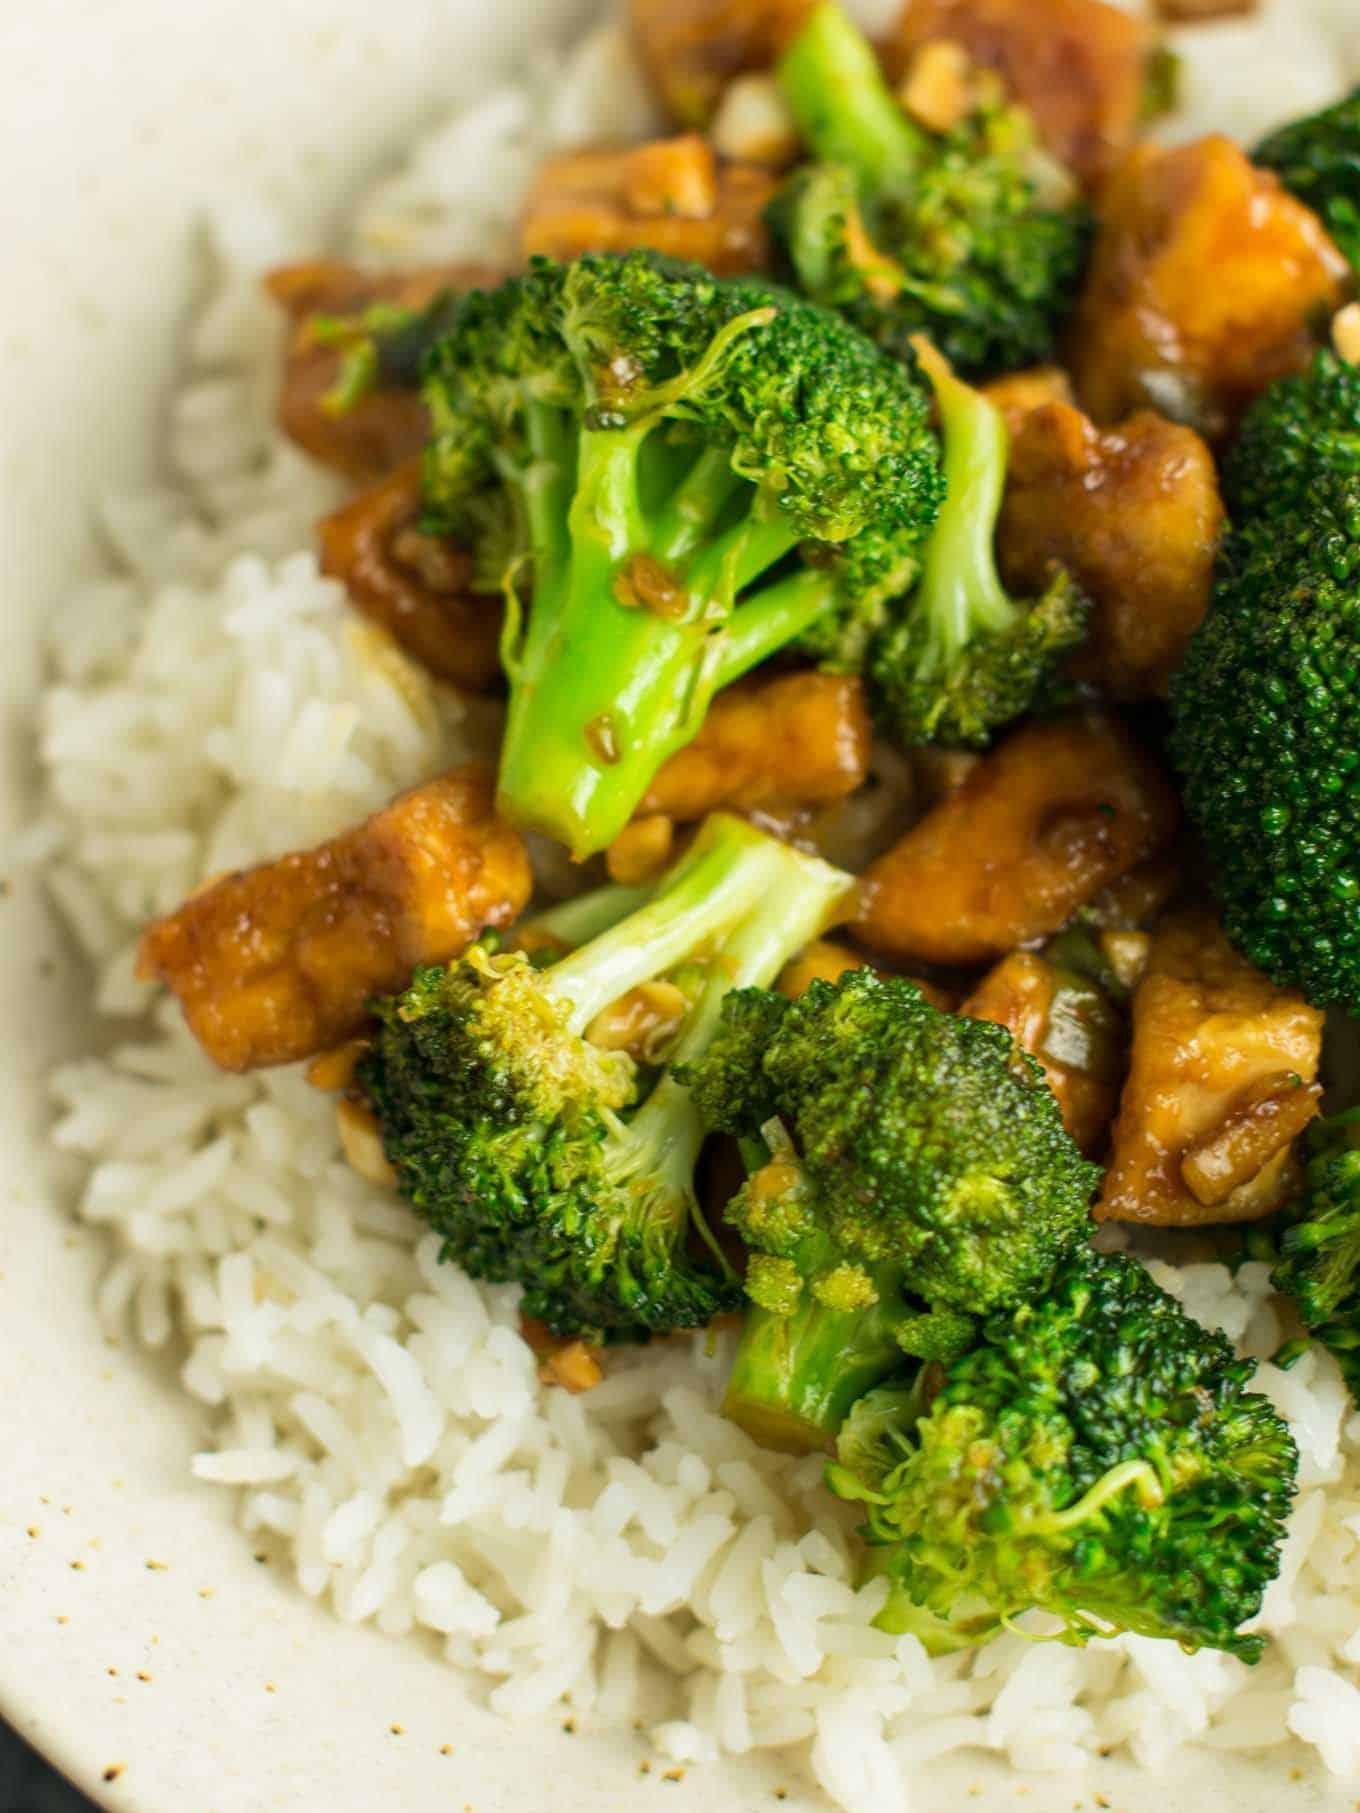 Garlic tofu broccoli skillet recipe made in just one pan. A healthy alternative to takeout in a rich garlicky sauce with fresh broccoli. #vegan #tofu #broccoli #garlicsauce #onepan #healthy